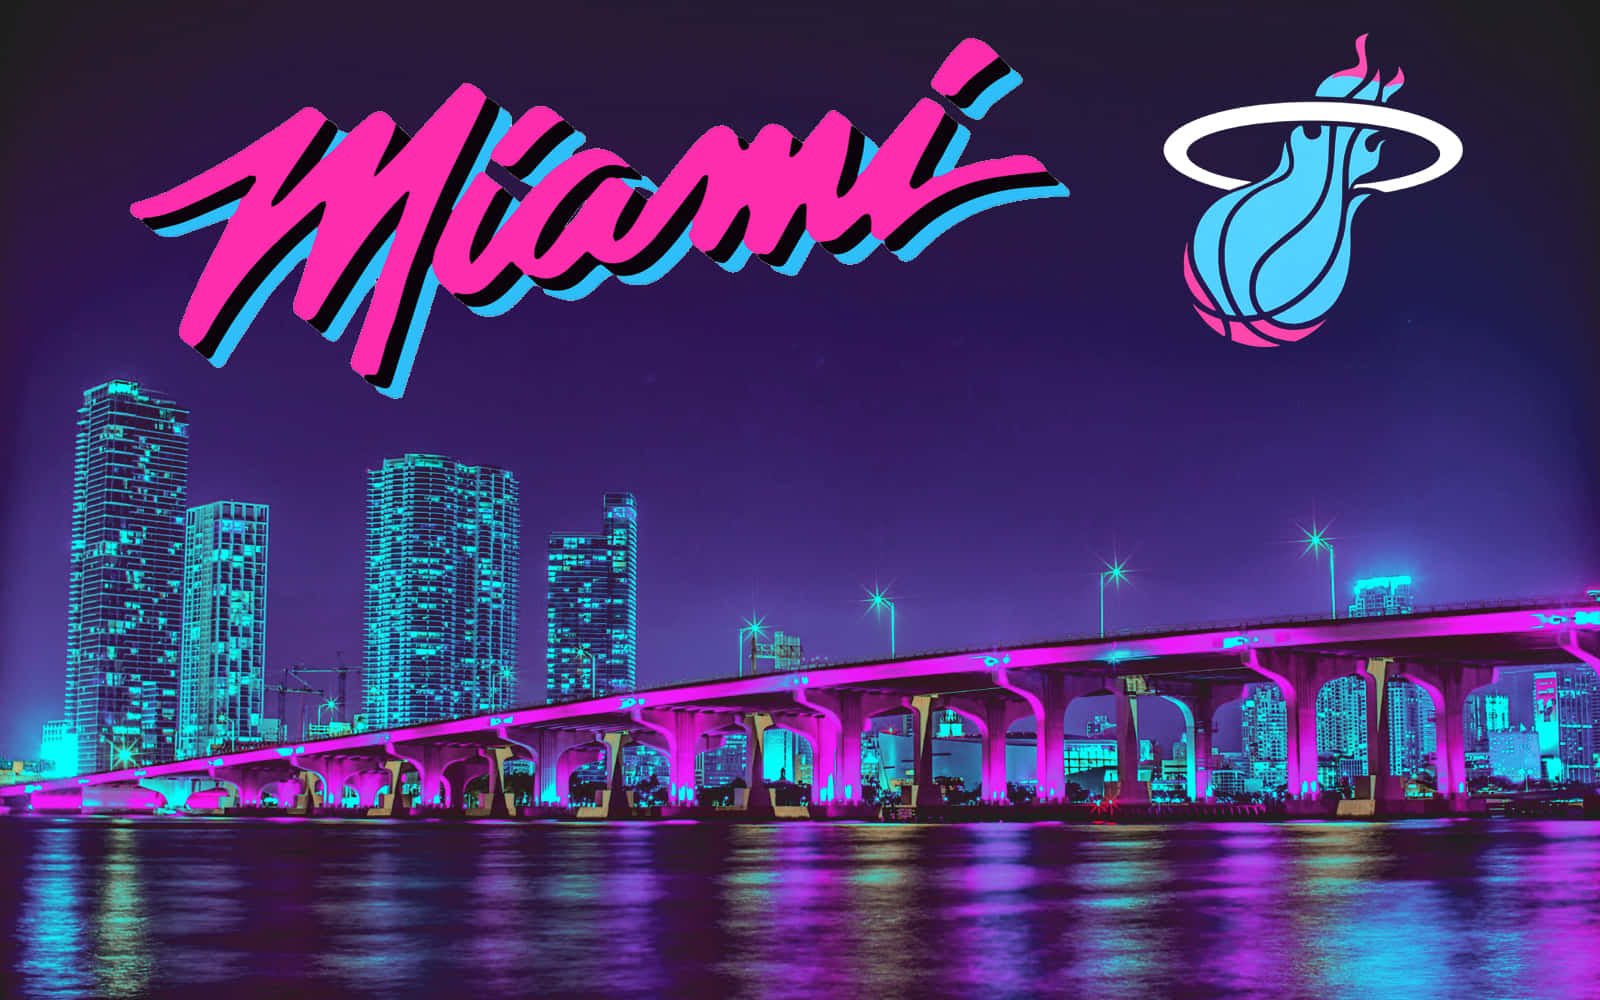 The Miami Heat Logo Is Shown In Neon Lights